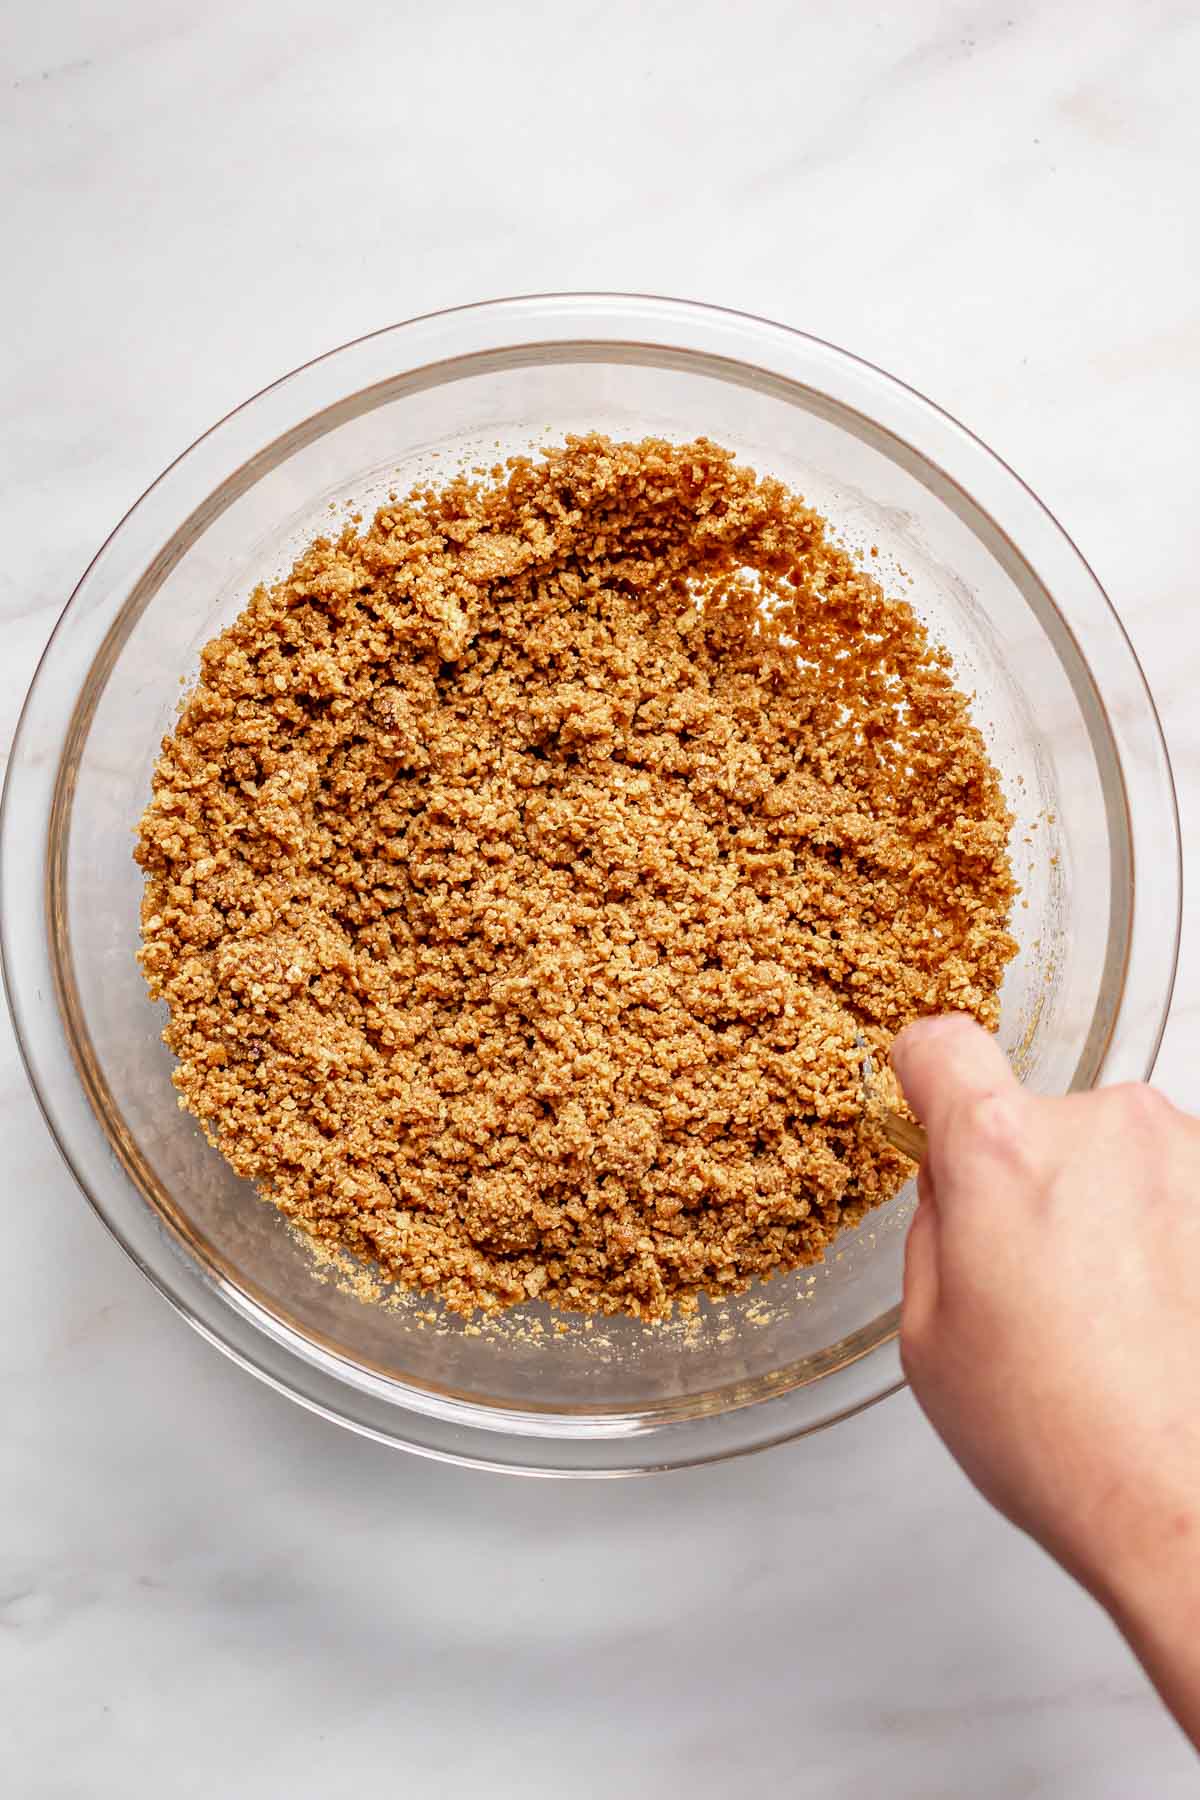 Graham cracker crumbs mixed in a bowl.